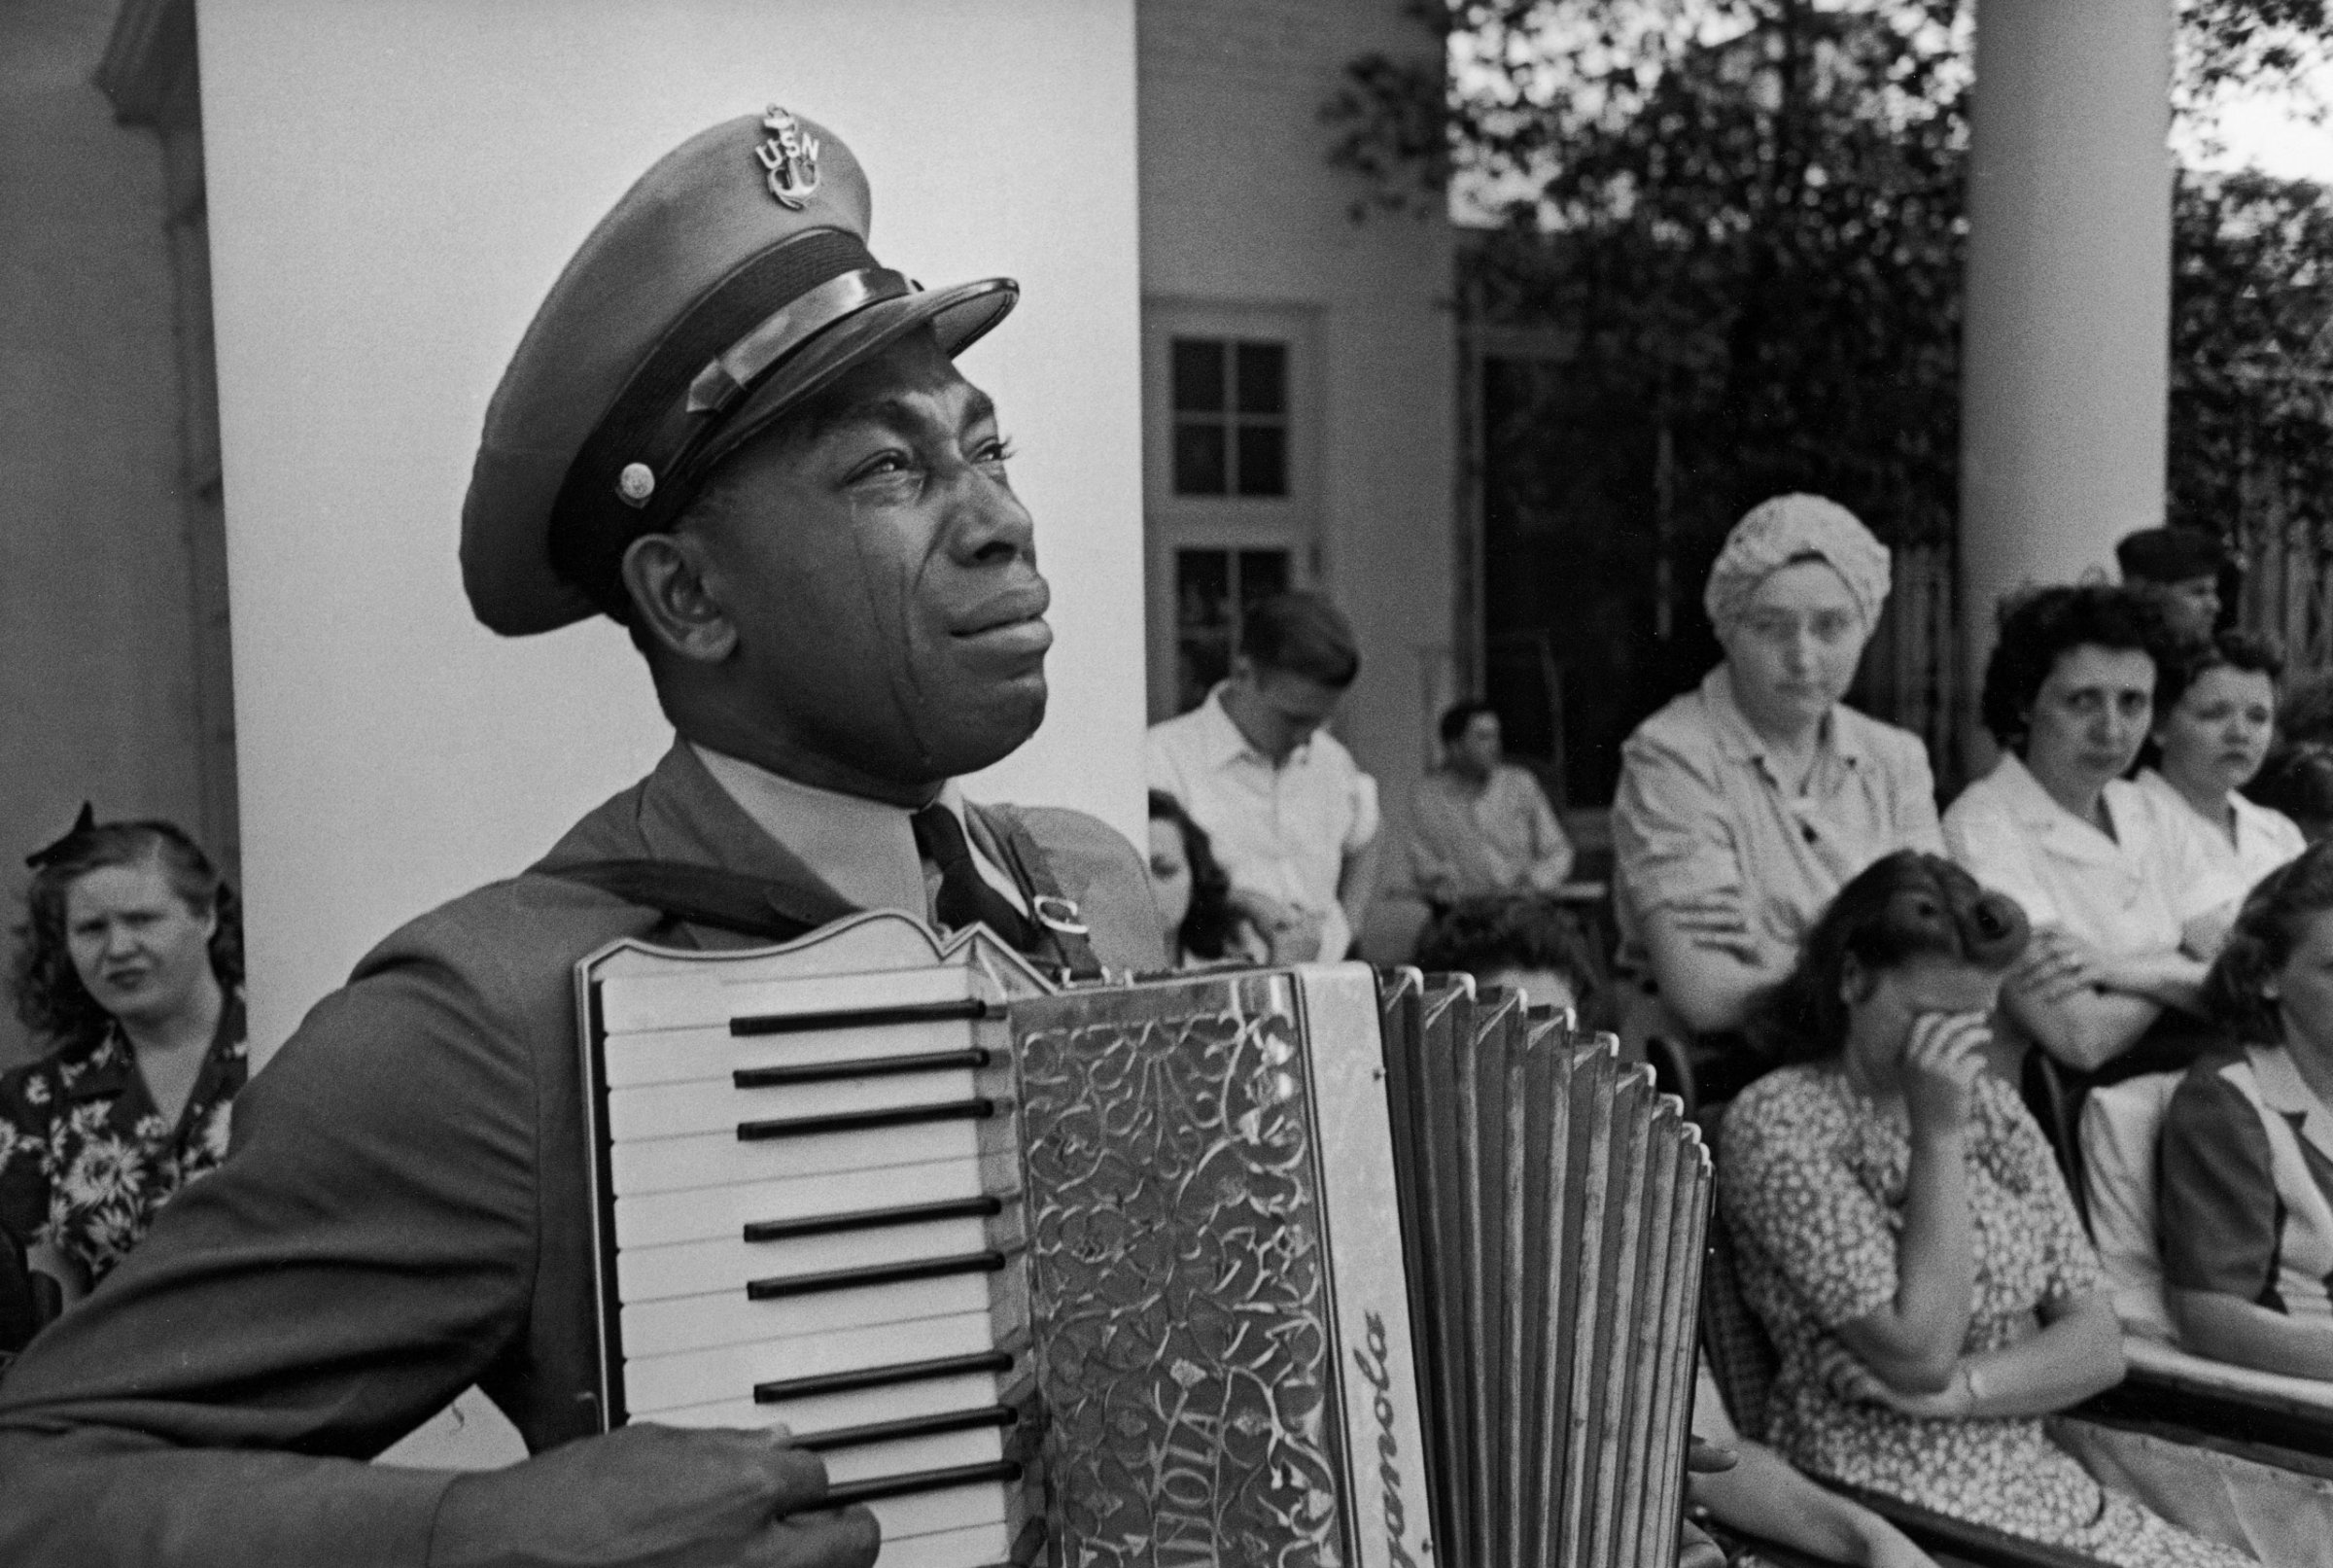 Tears stream down the cheeks of accordion-playing Chief Petty Officer (USN) Graham Jackson as President Franklin D. Roosevelt's flag-draped funeral train leaves Warm Springs, Ga., April 13, 1945.